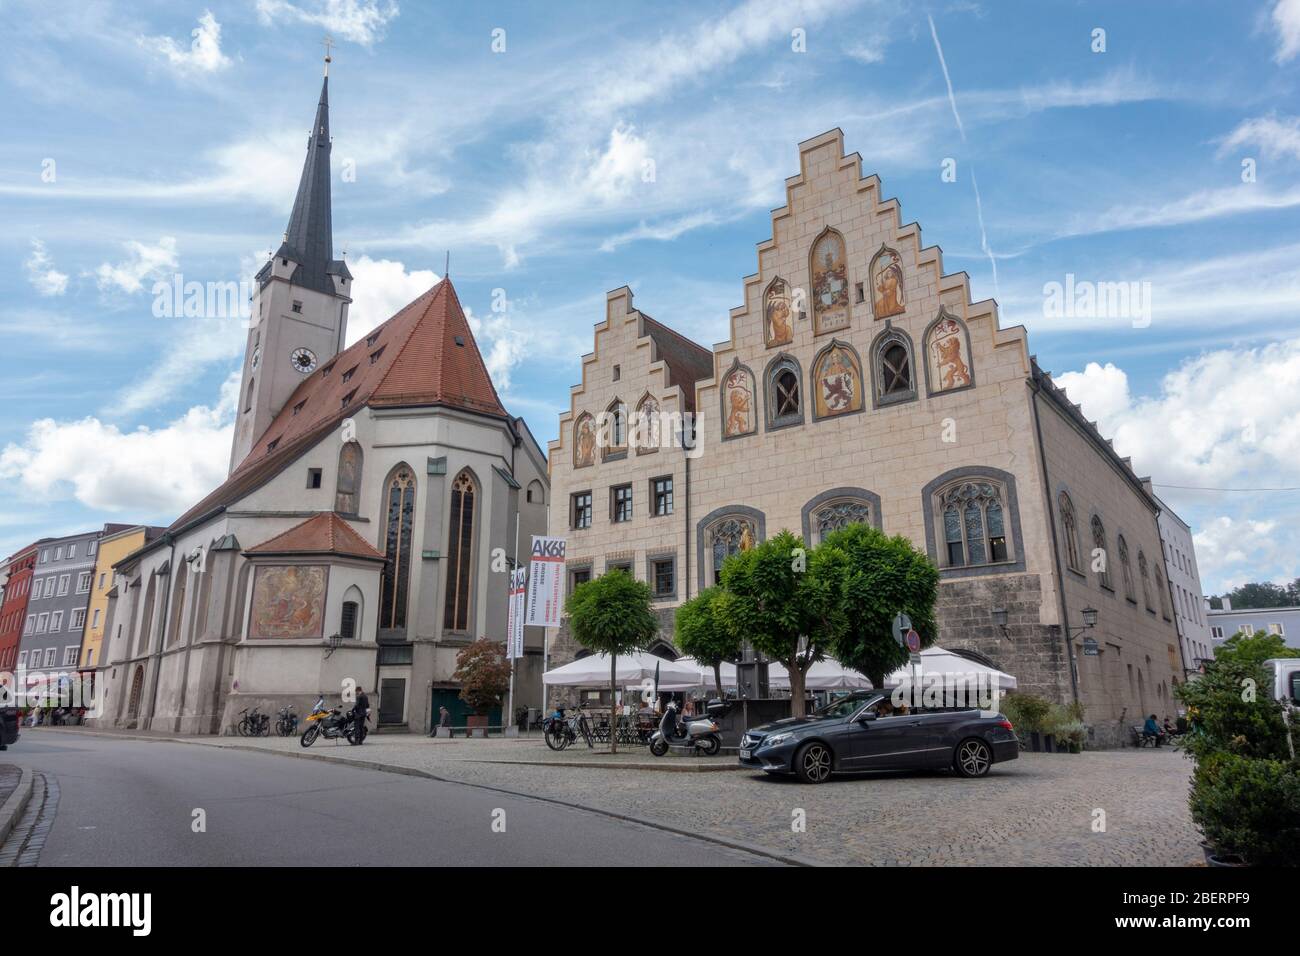 The Roman Catholic Church of Our Lady (Frauenkirche) and Old Town Hall (Historisches Rathaus) in Wasserburg, Bavaria, Germany. Stock Photo